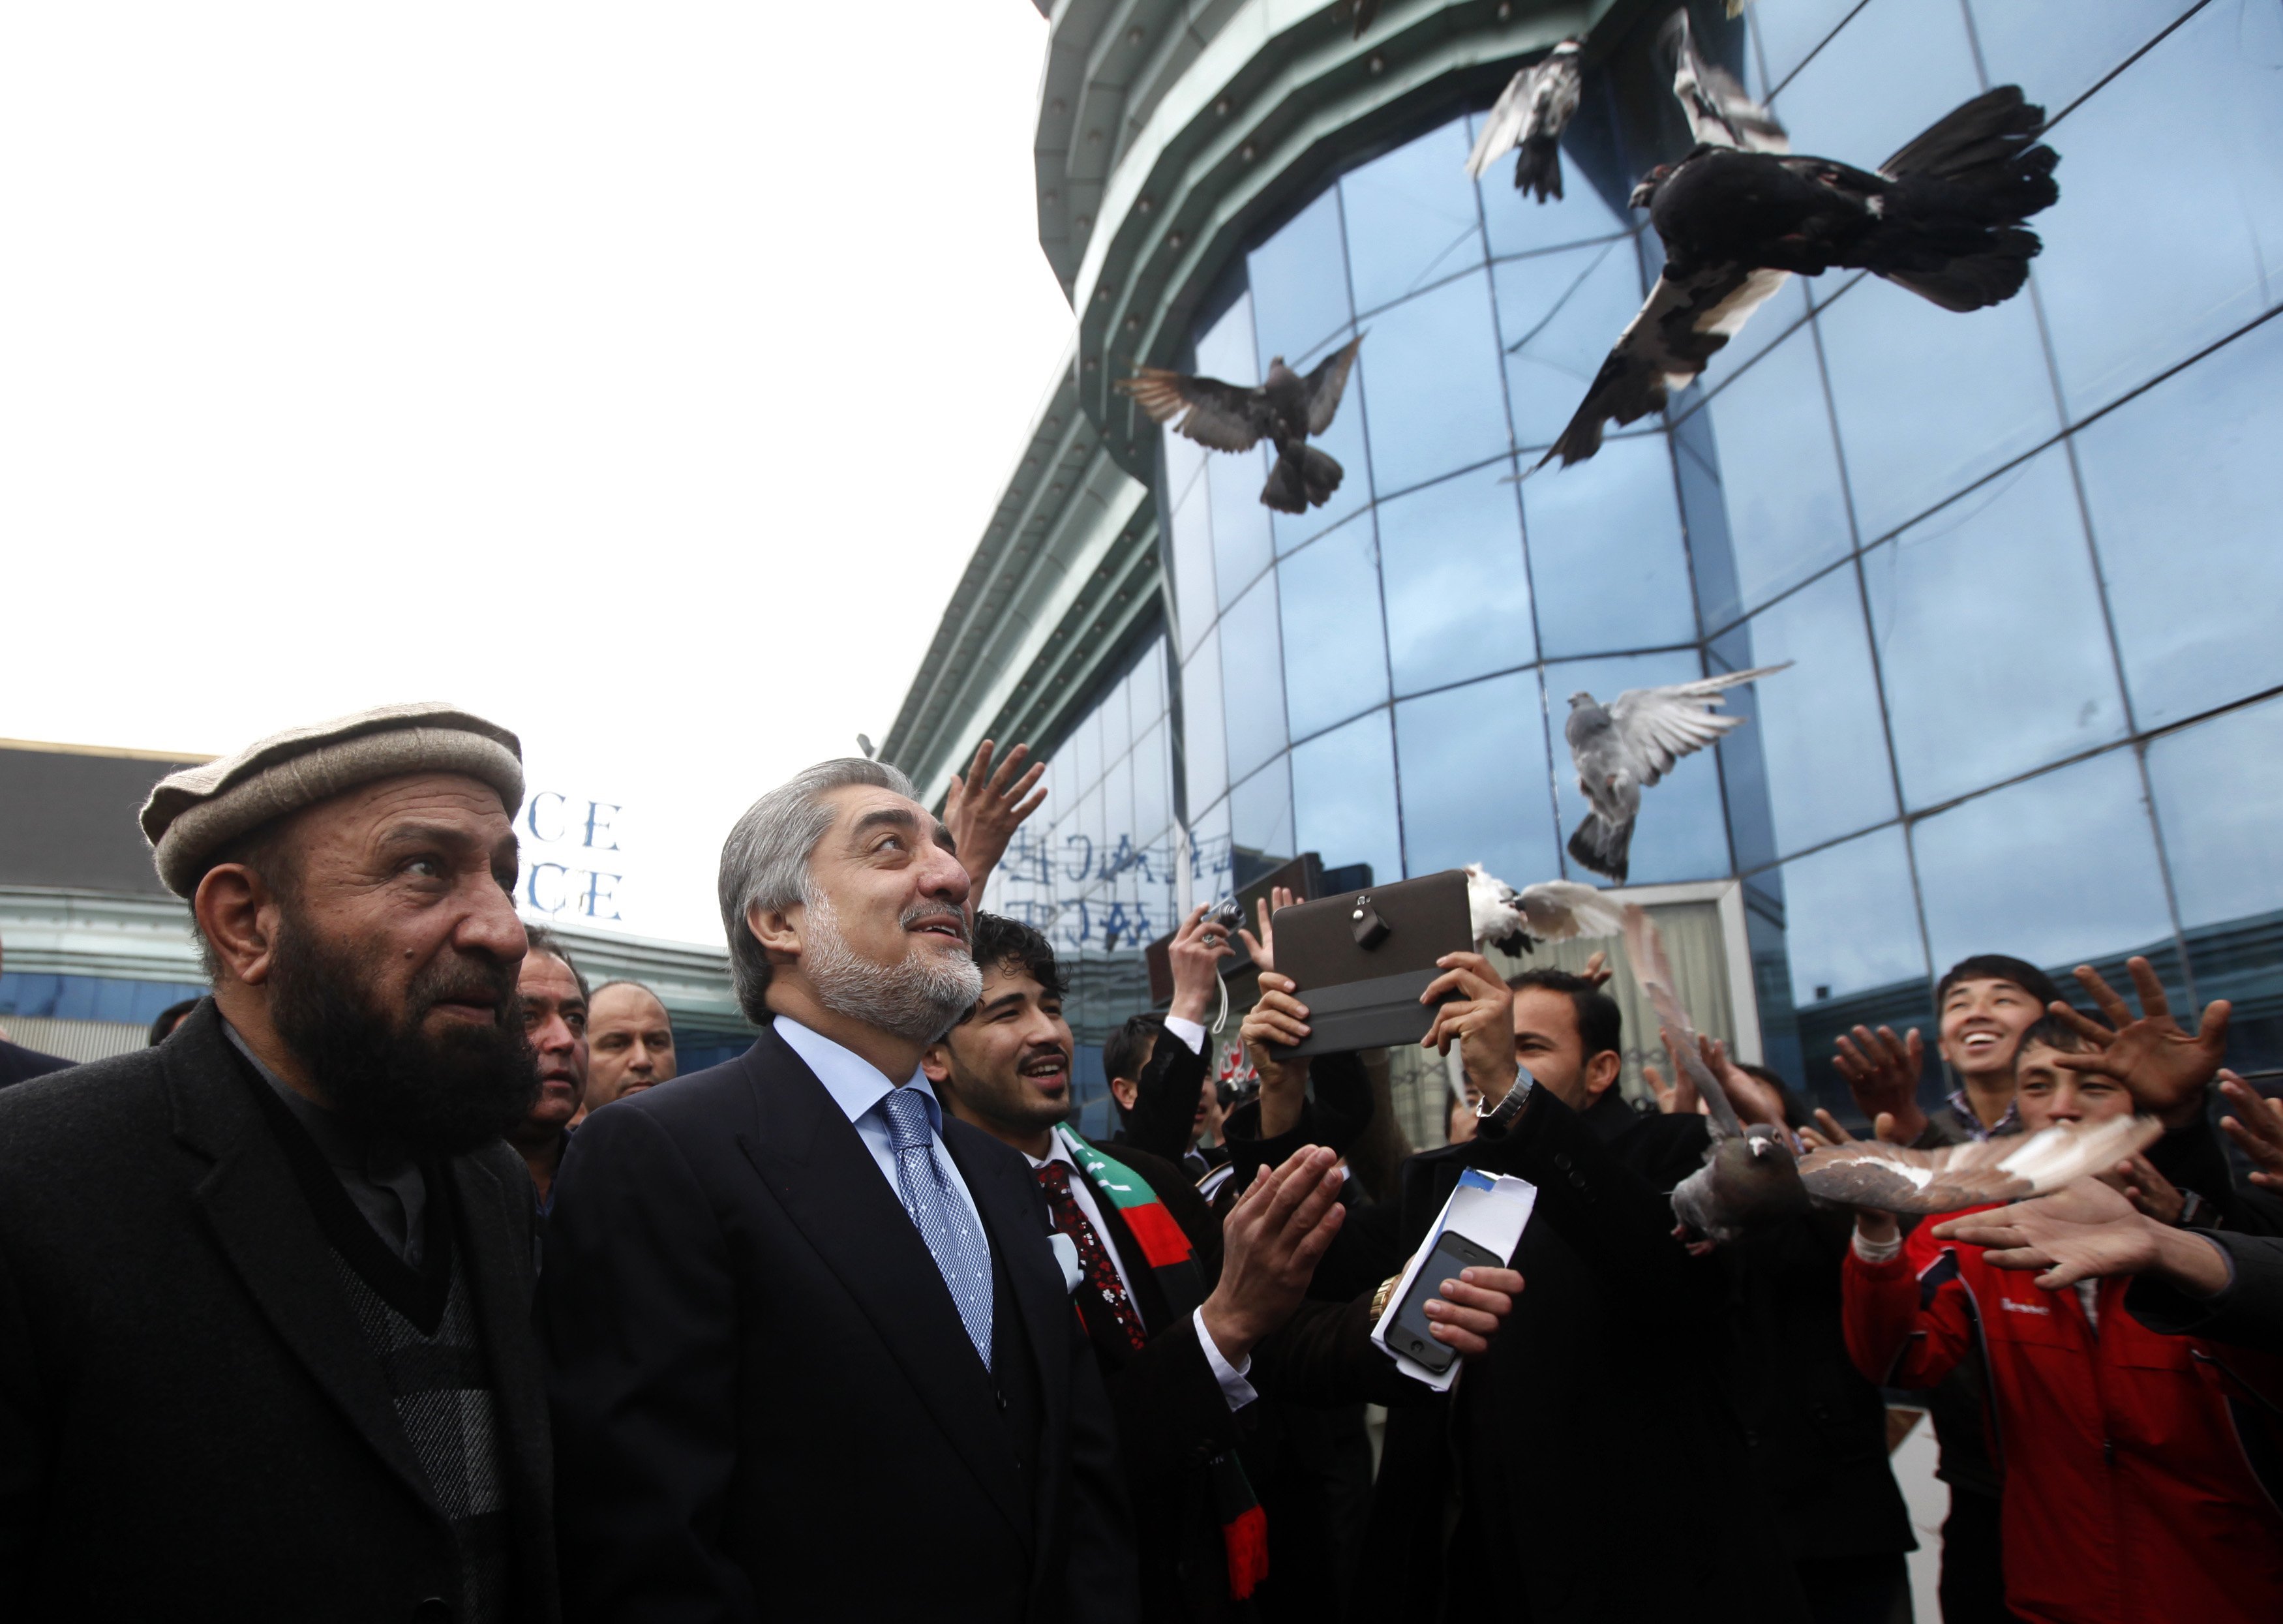 Supporters of Afghan presidential candidate Abdullah Abdullah release pigeons during the first day of the presidential election campaign in Kabul